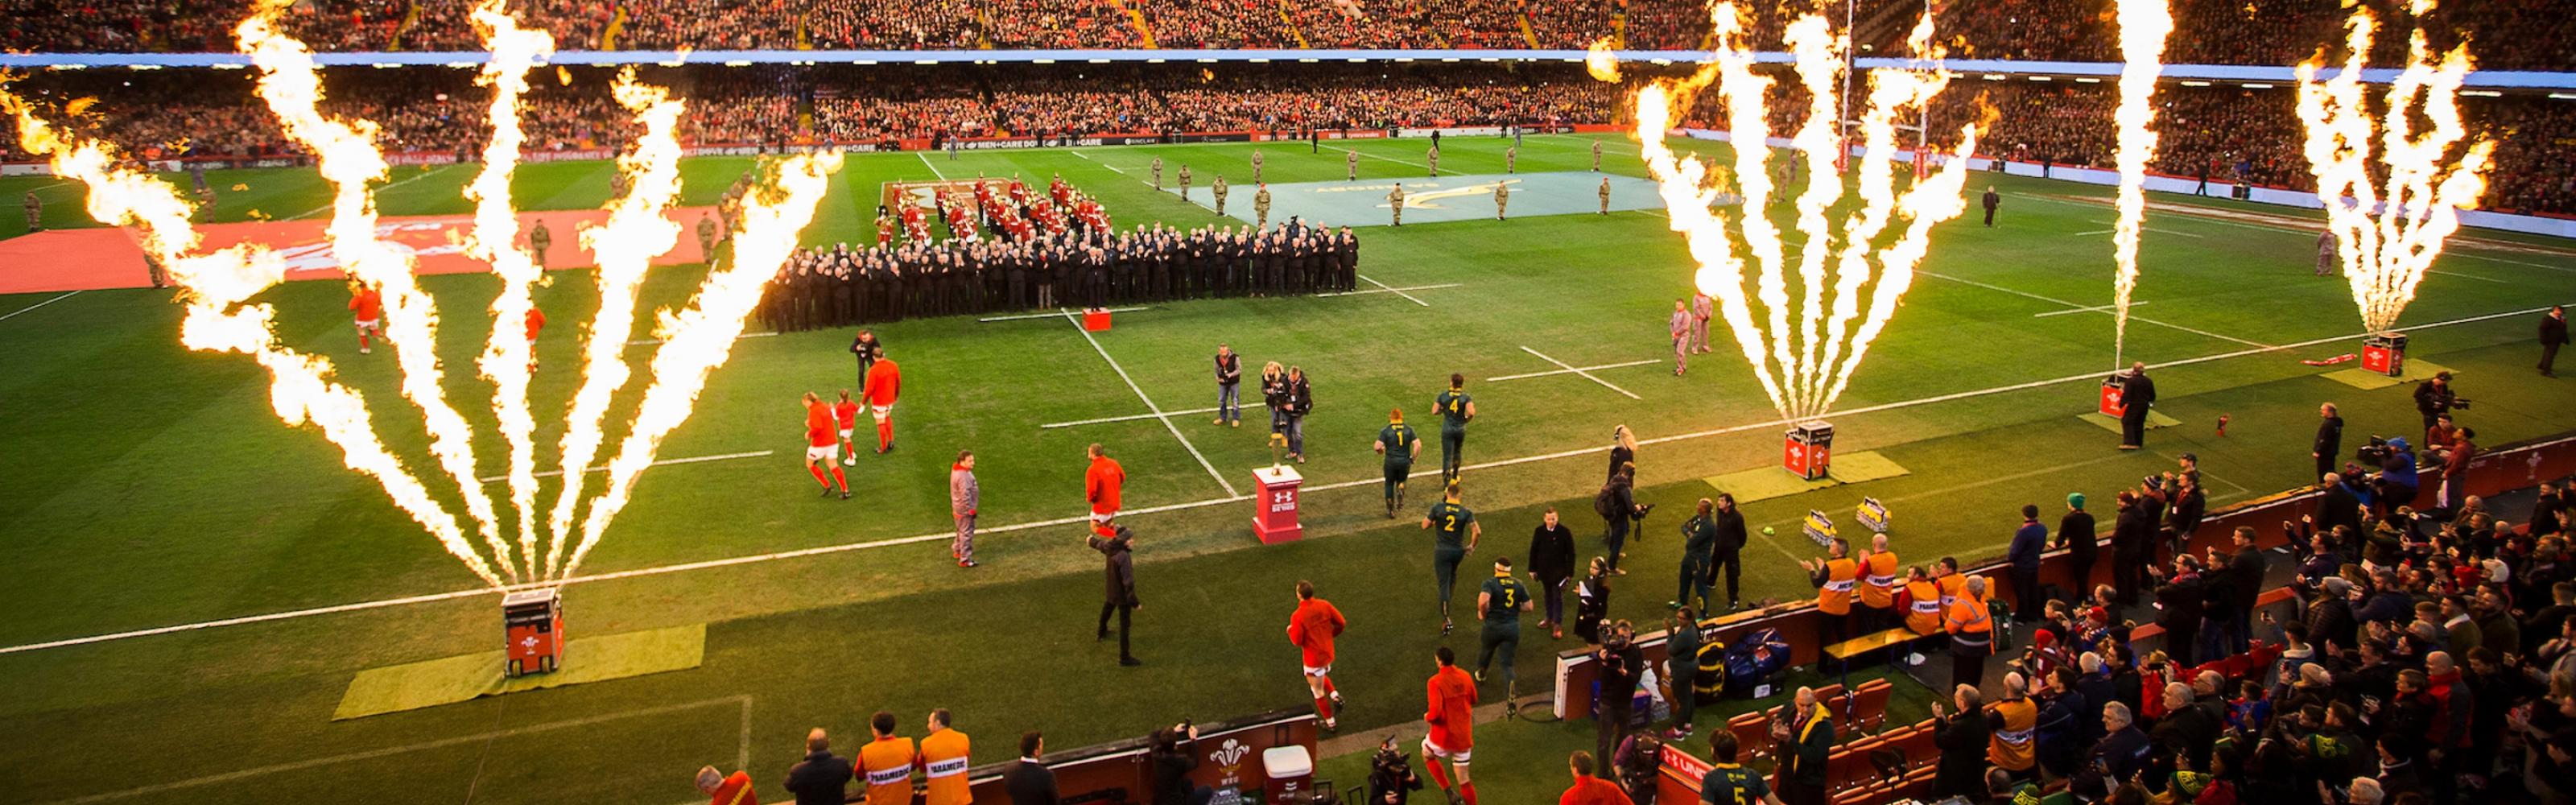 Welsh Rugby | Welsh Identity| Wales.com